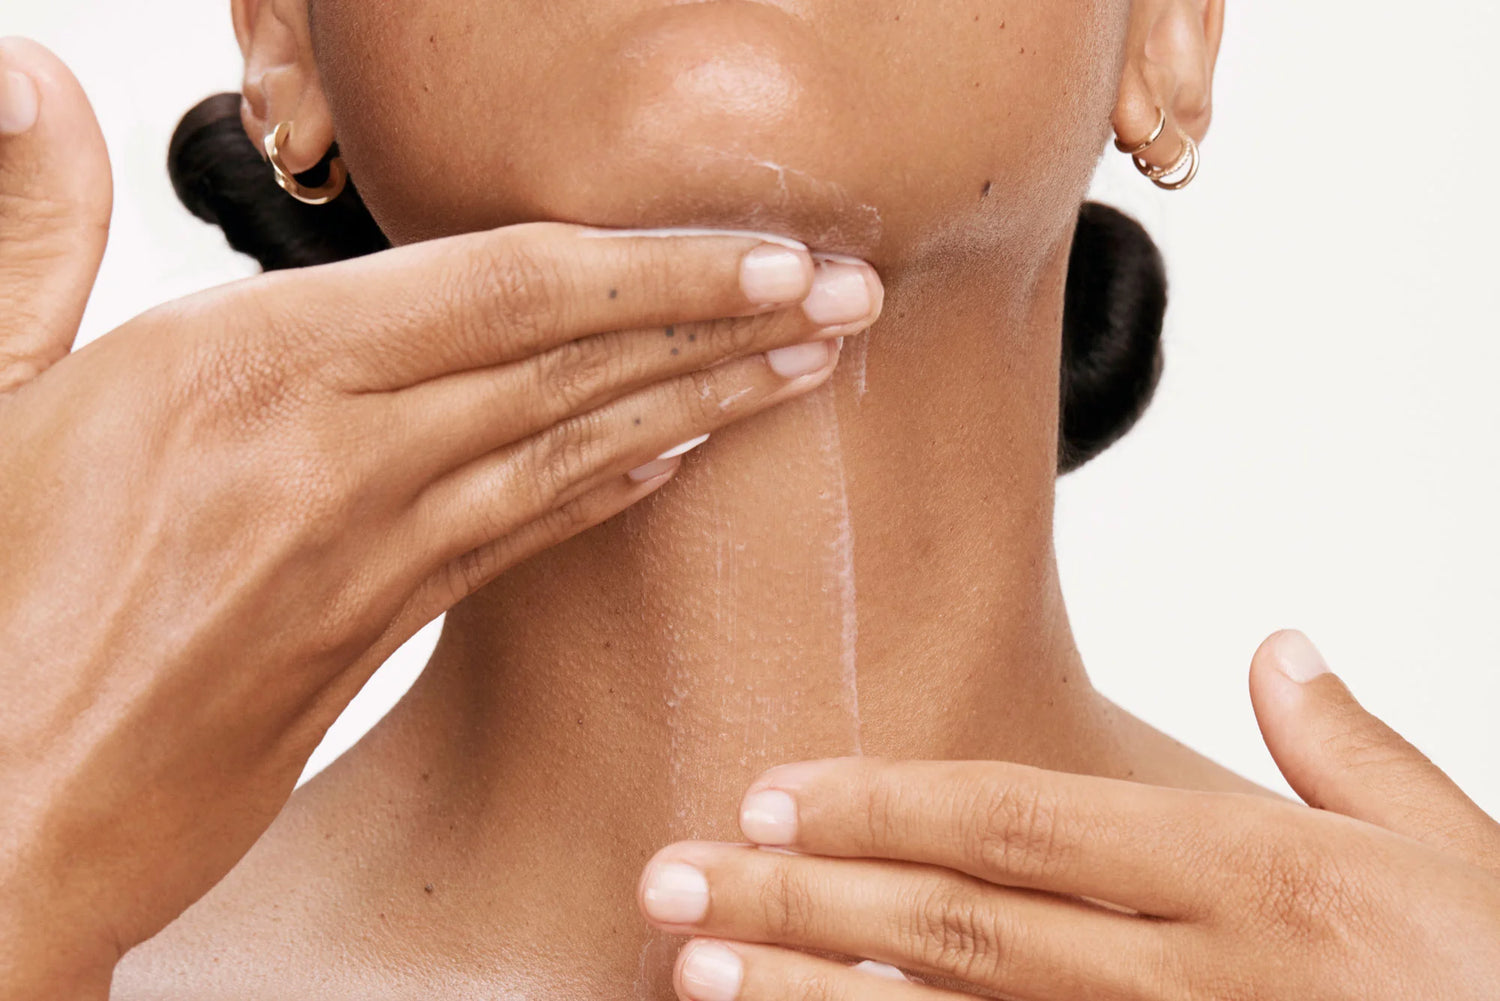 Rejuvenate Your Neck with Svdaa's Tightening Solutions